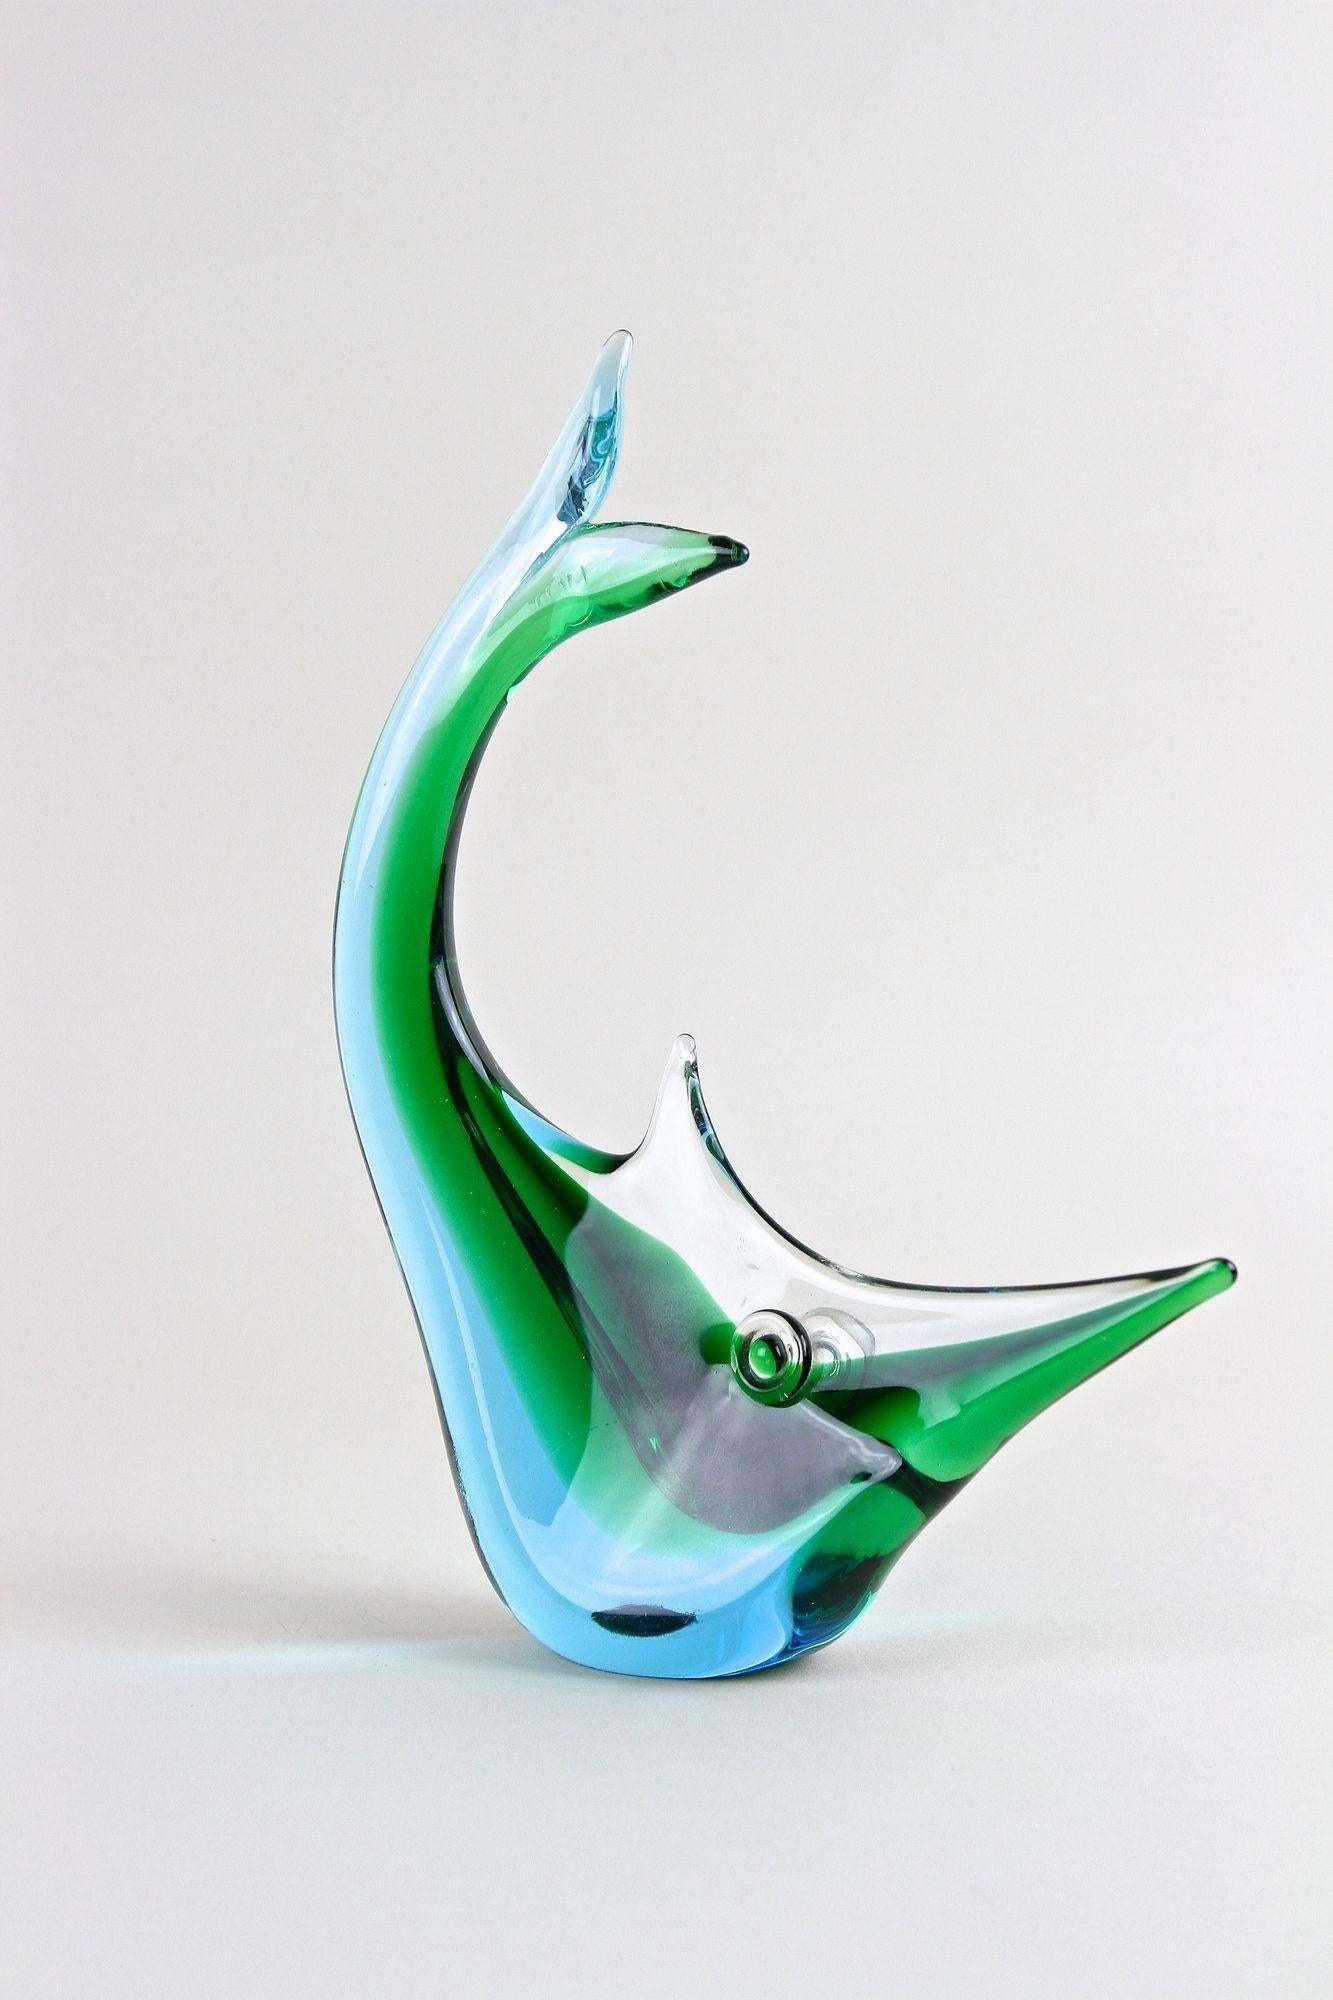 Mid-Century Modern Mid Century Murano Glass Fish In Blue/ Green Tones , Glass Art - Italy ca. 1970 For Sale